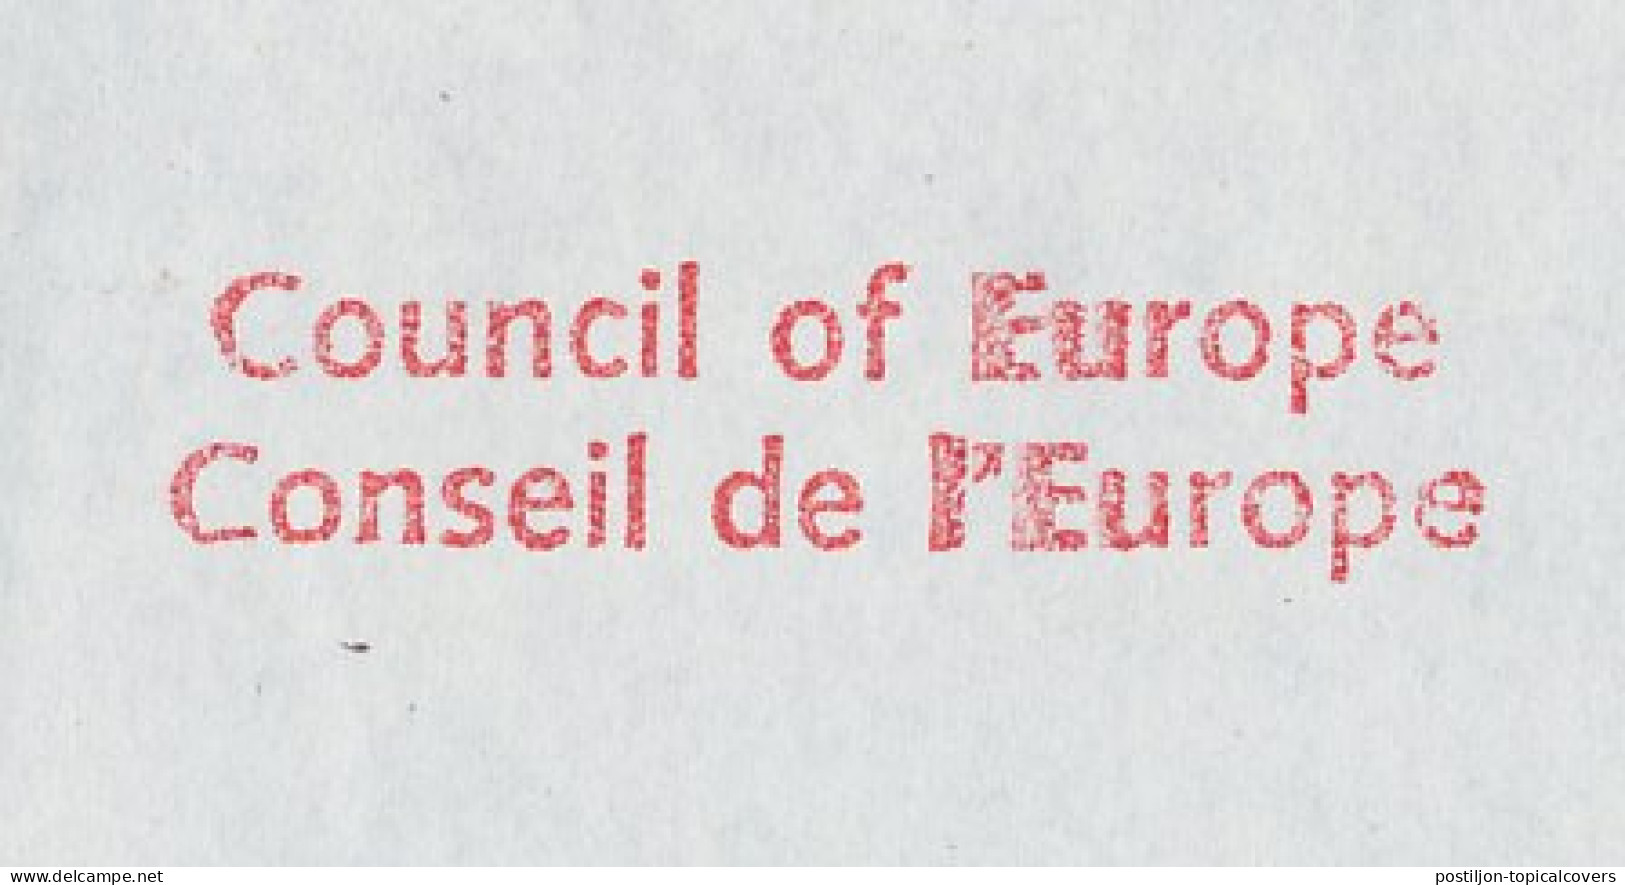 Meter Cover France 1993 Council Of Europe - Europese Instellingen